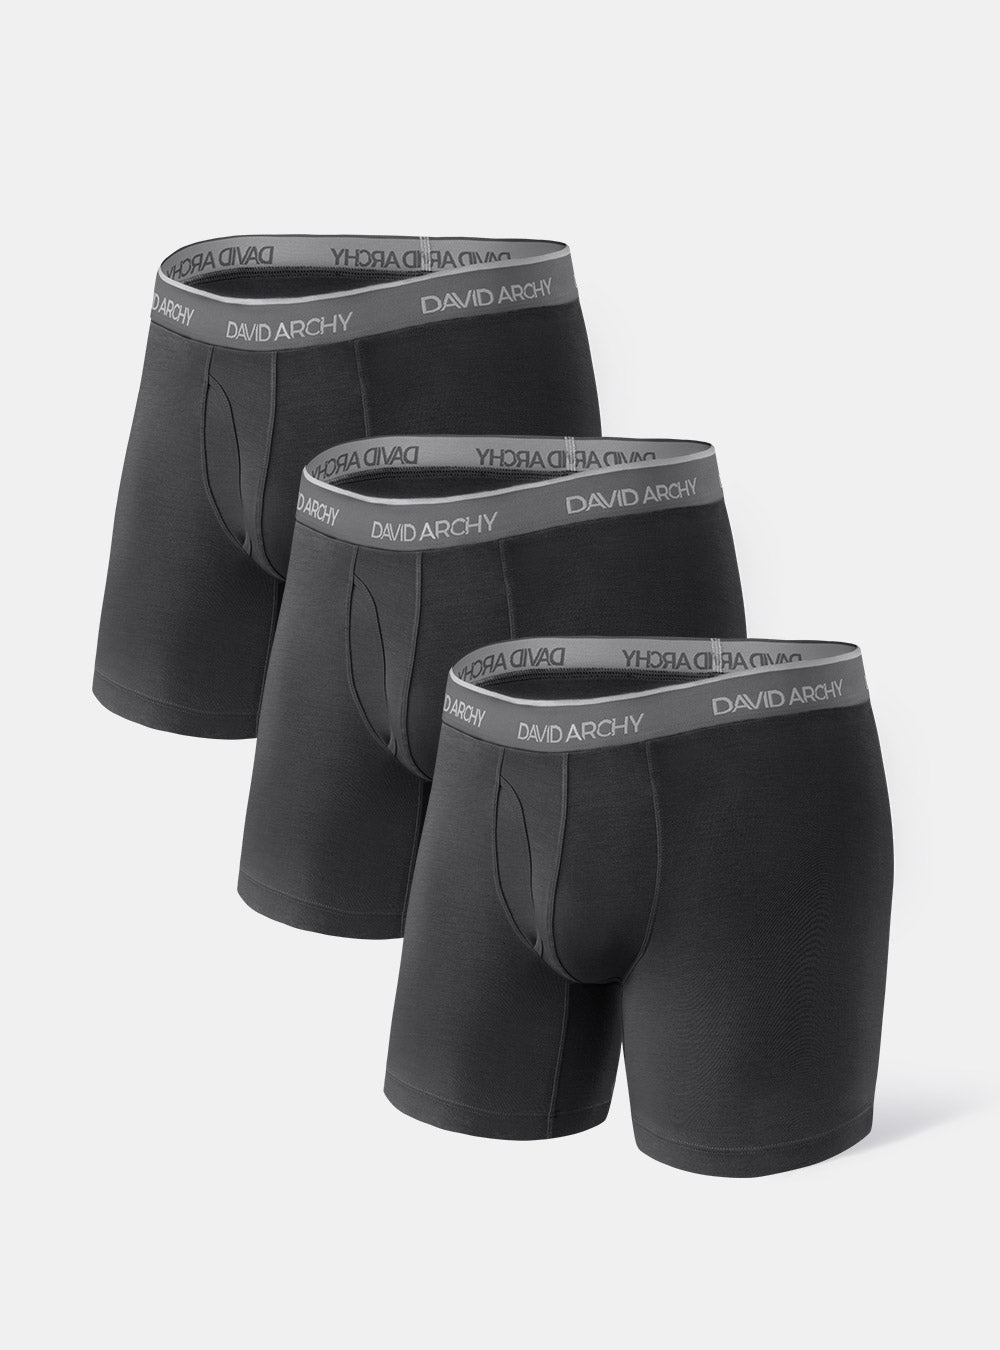  DAVID ARCHY Mens 4 Pack Micro Modal Separate Pouch